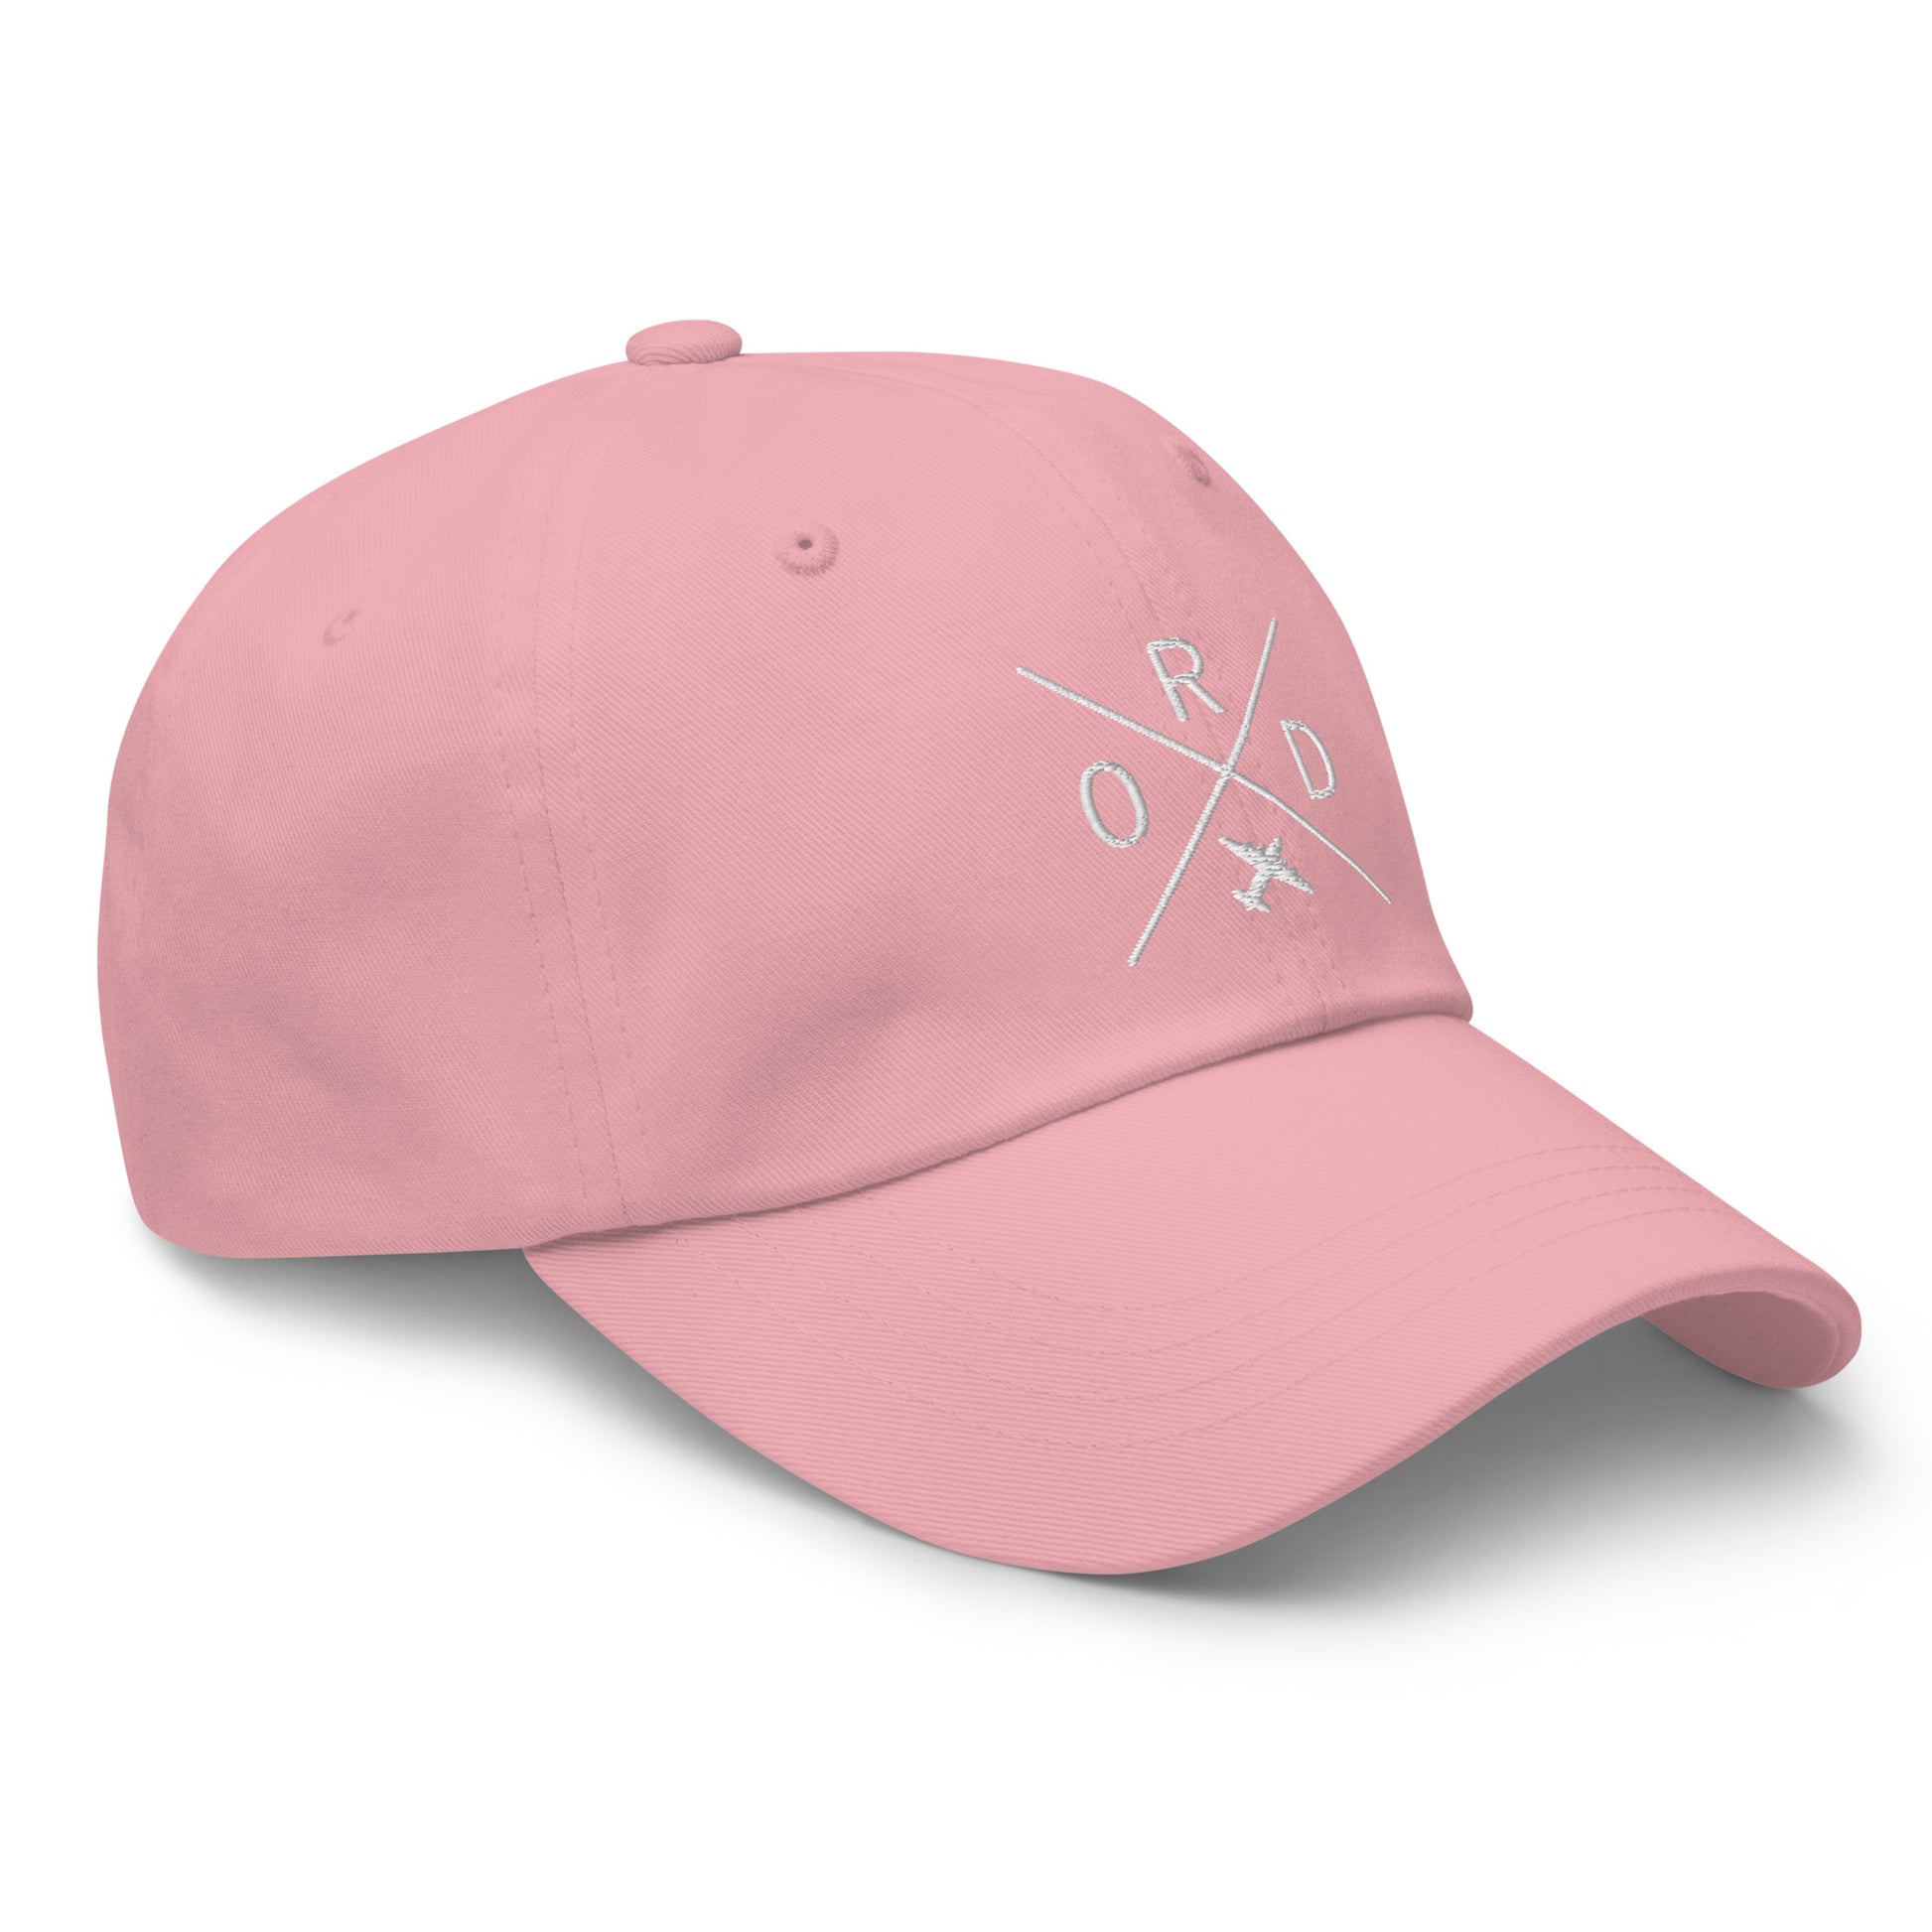 Crossed-X Dad Hat - White • ORD Chicago • YHM Designs - Image 26